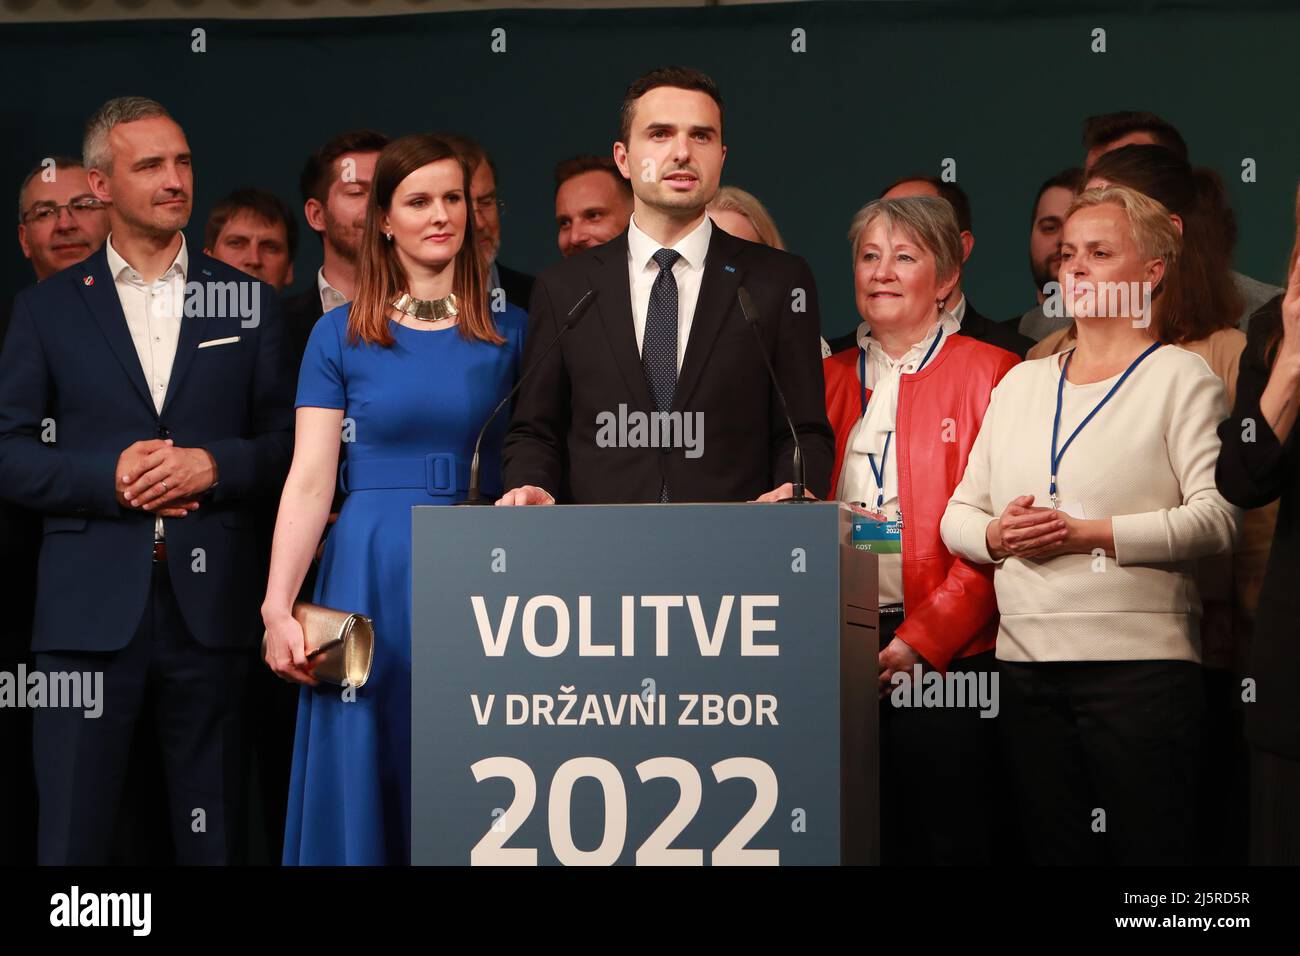 Ljubljana, Slovenia. 24th Apr, 2022. Matej Tonin (front), the leader of New Slovenia addresses his party at the media center in Ljubljana, Slovenia, April 24, 2022. Freedom Movement (FM), a new center-left party, recorded a landslide victory at Slovenia's general election on Sunday, defeating the center-right Slovenian Democratic Party led by Prime Minister Janez Jansa. Credit: Zeljko Stevanic/Xinhua/Alamy Live News Stock Photo